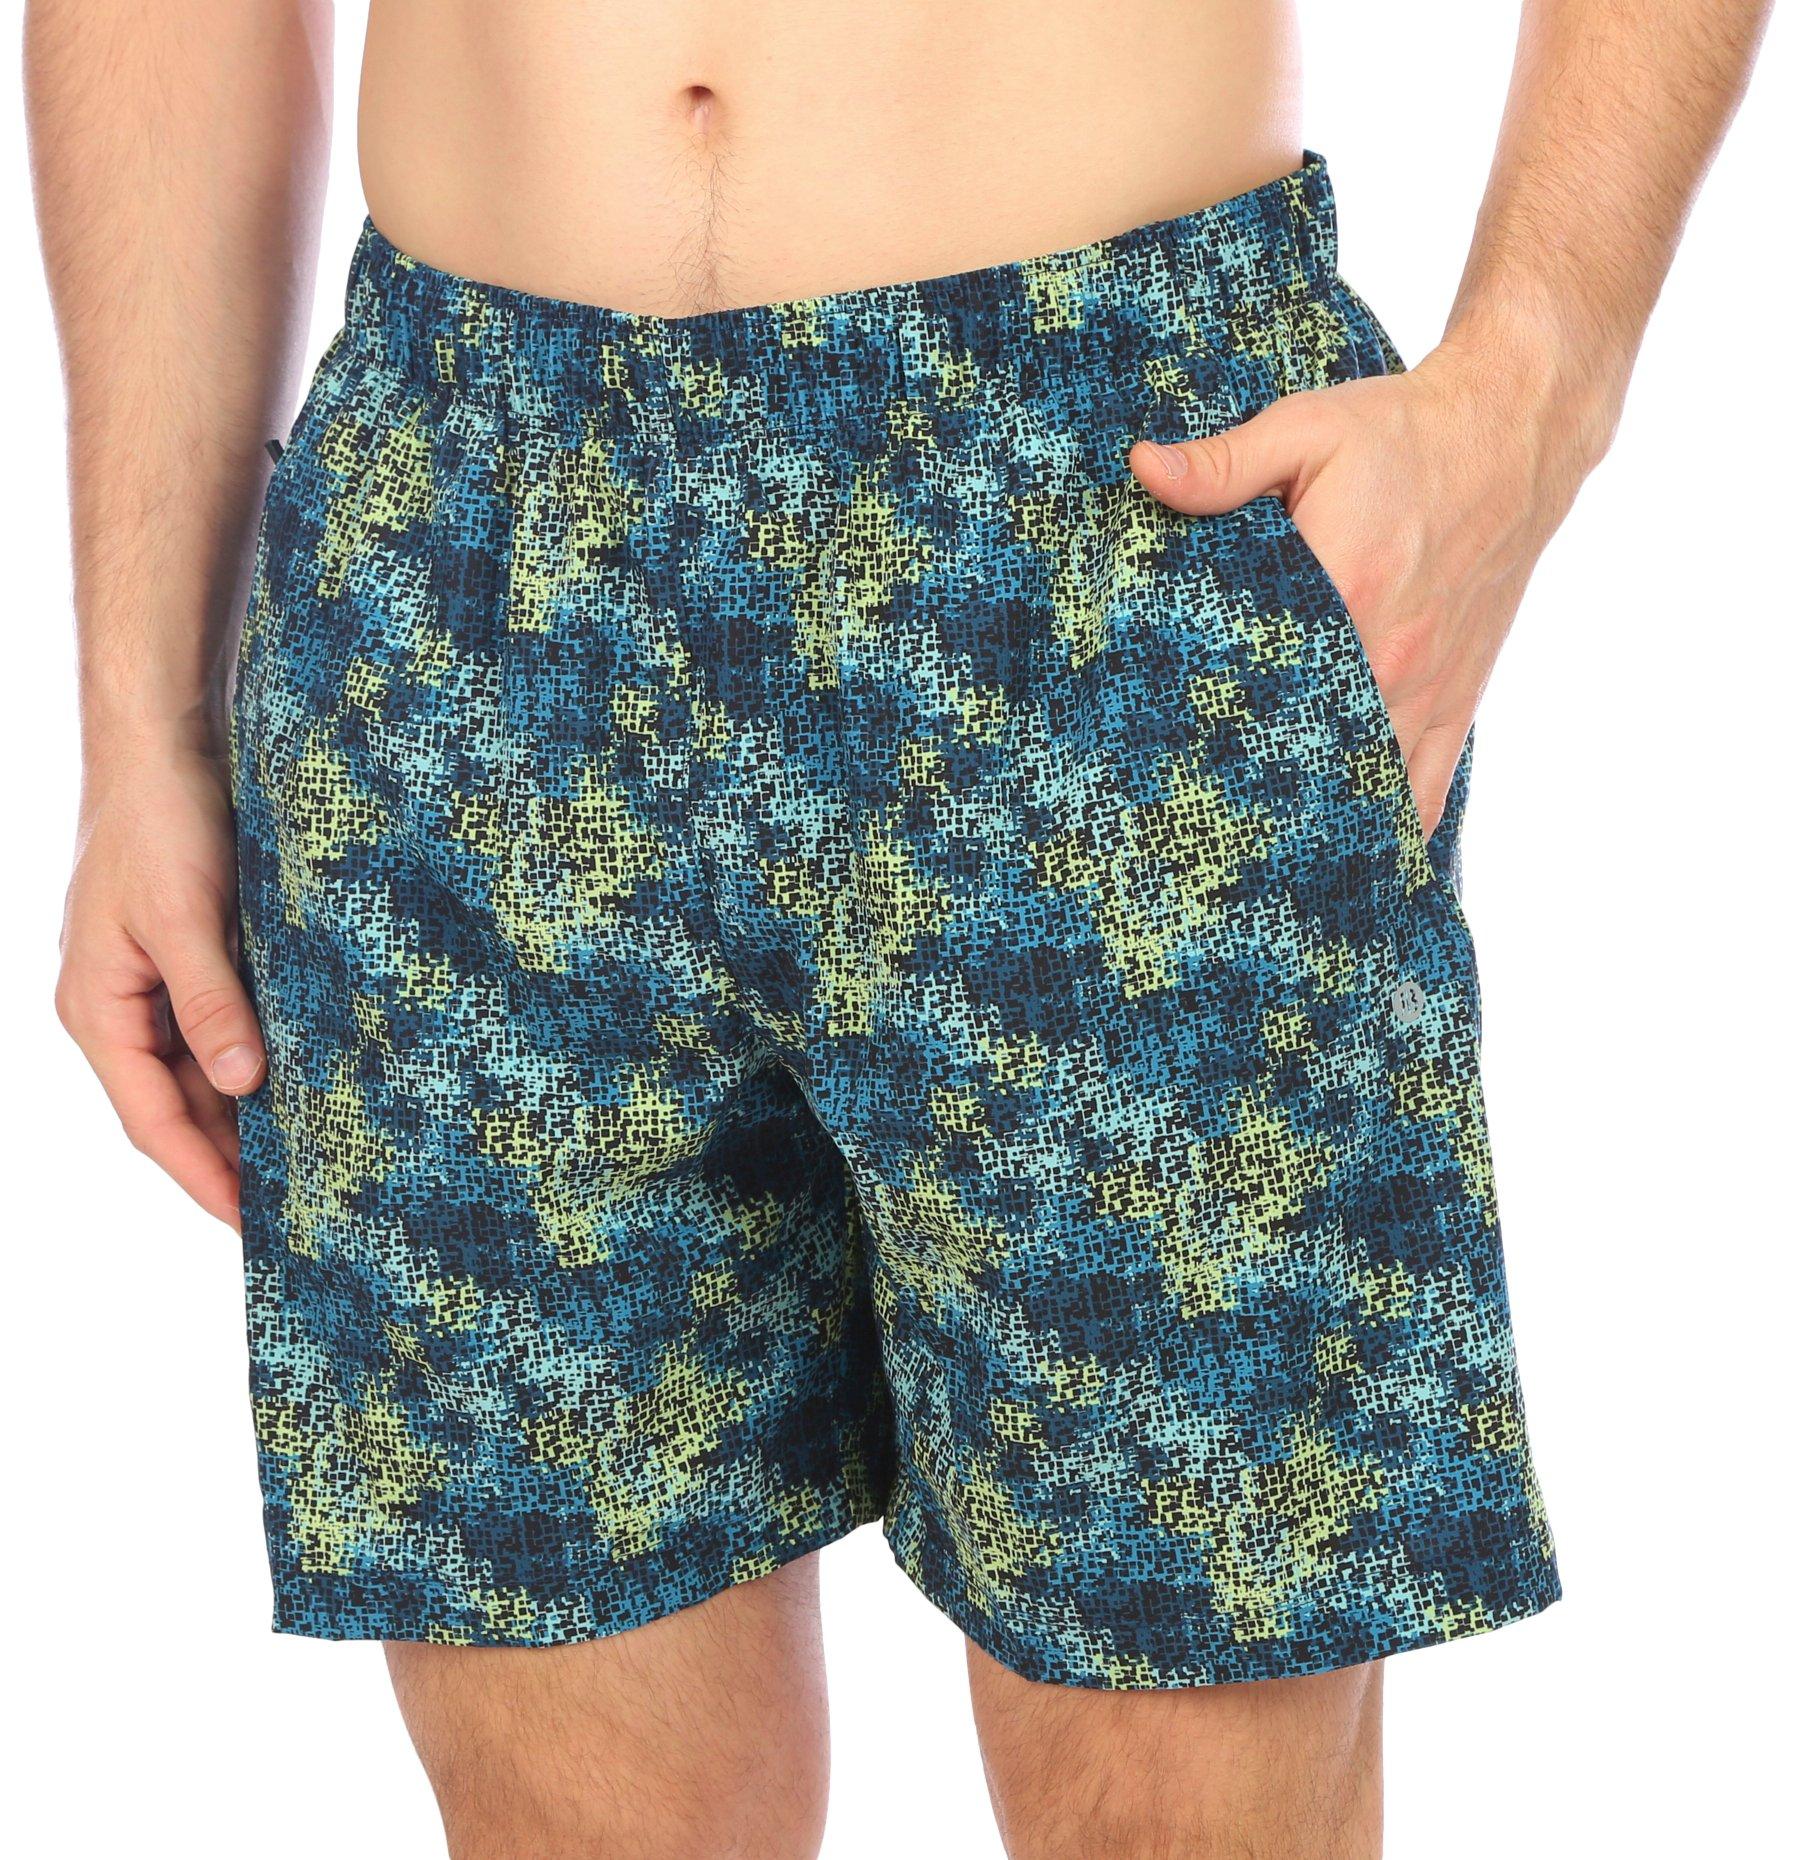 Mens 7in. 2-IN-1 Print Woven Running Shorts